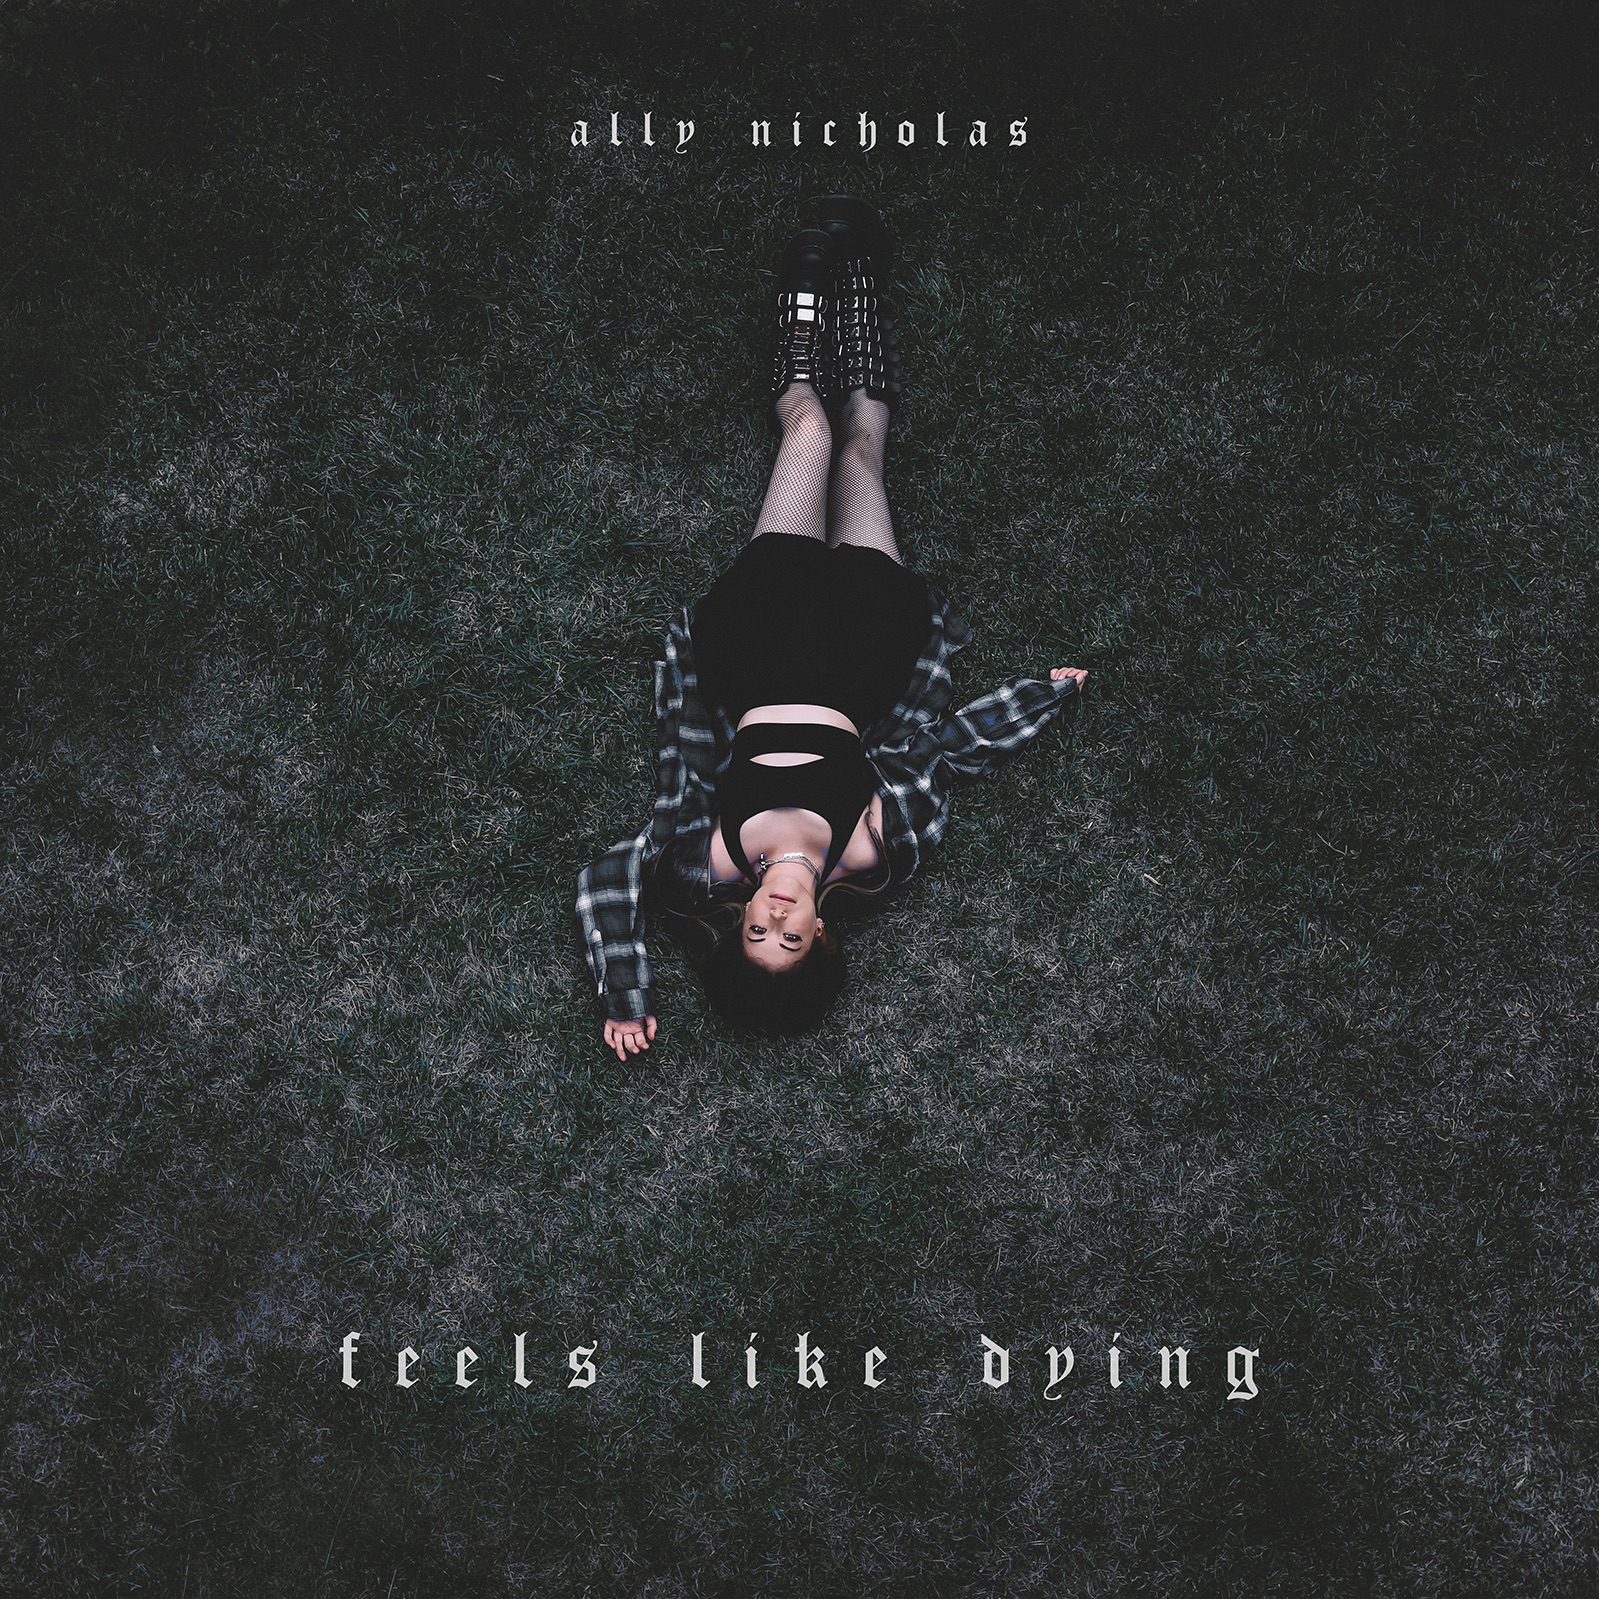 feels like dying - ally nicholas - USA - indie music - new music - indie rock - music blog - indie blog - wolf in a suit - wolfinasuit - wolf in a suit blog - wolf in a suit music blog